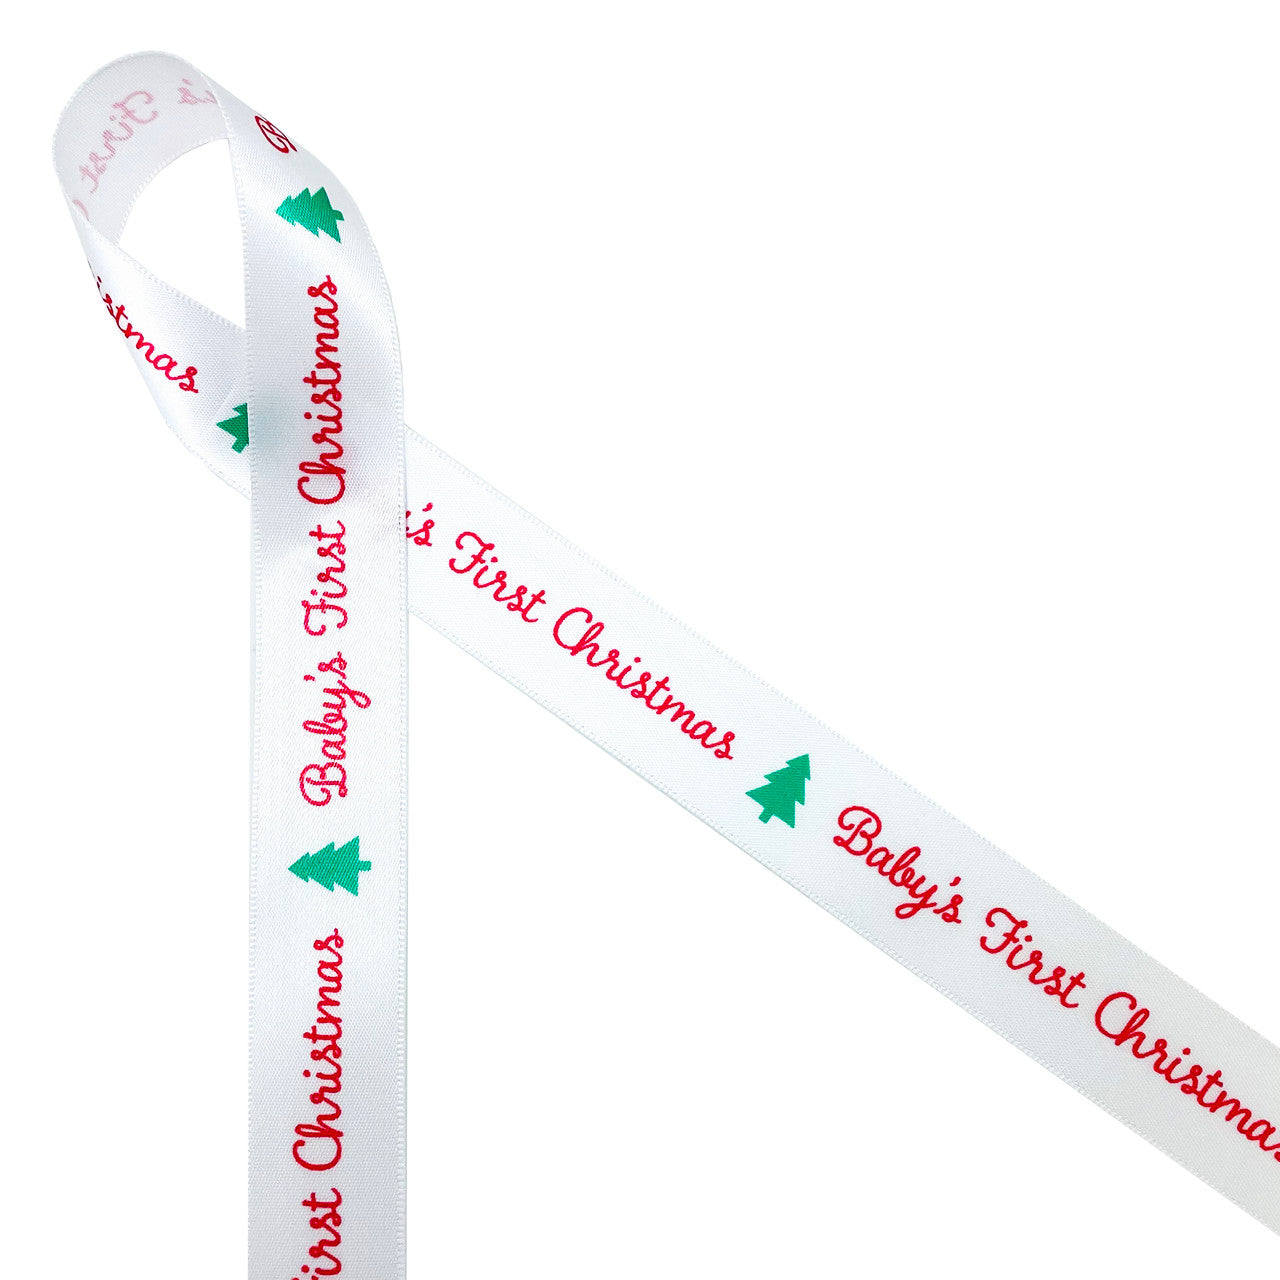 Baby's first Christmas ribbon in red with a green Christmas tree printed on 5/8" white single face satin is perfect for Baby's first special celebration. This is the perfect ribbon for gift wrap, gift bags, tree trimming, tree ornaments, Christmas crafts, sewing and quilting projects. All our ribbon is designed and printed in the USA